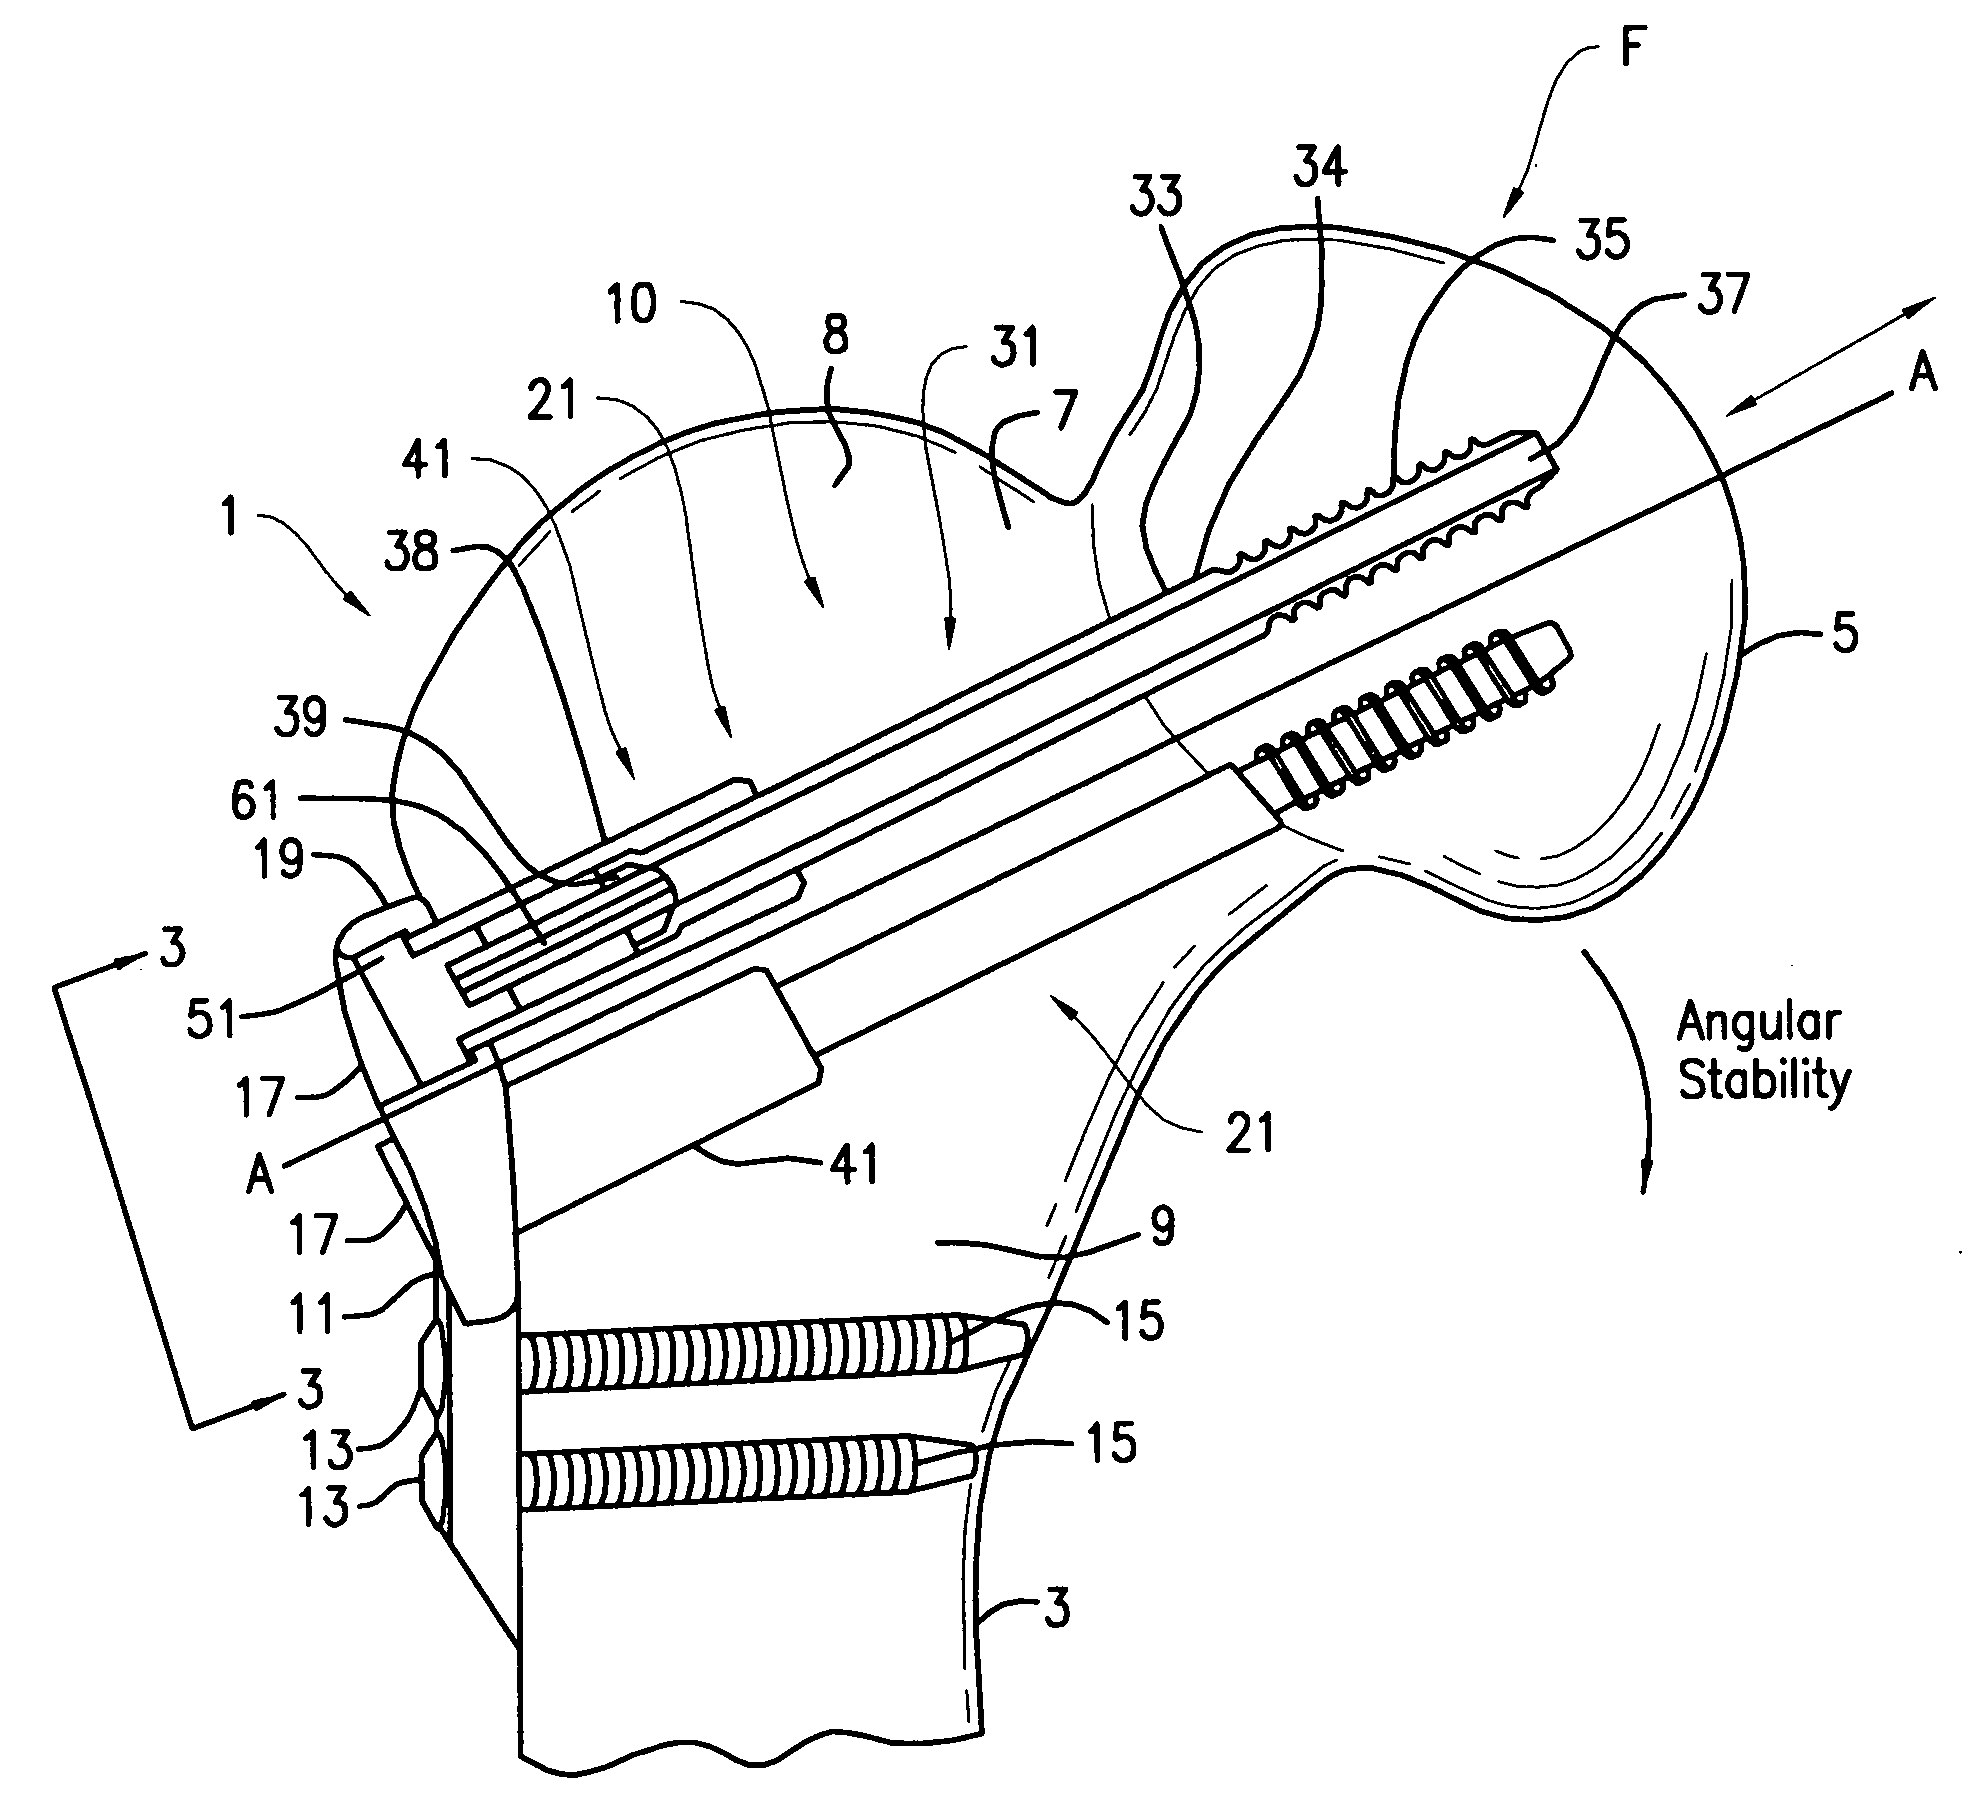 Hip fracture device with barrel and end cap for load control